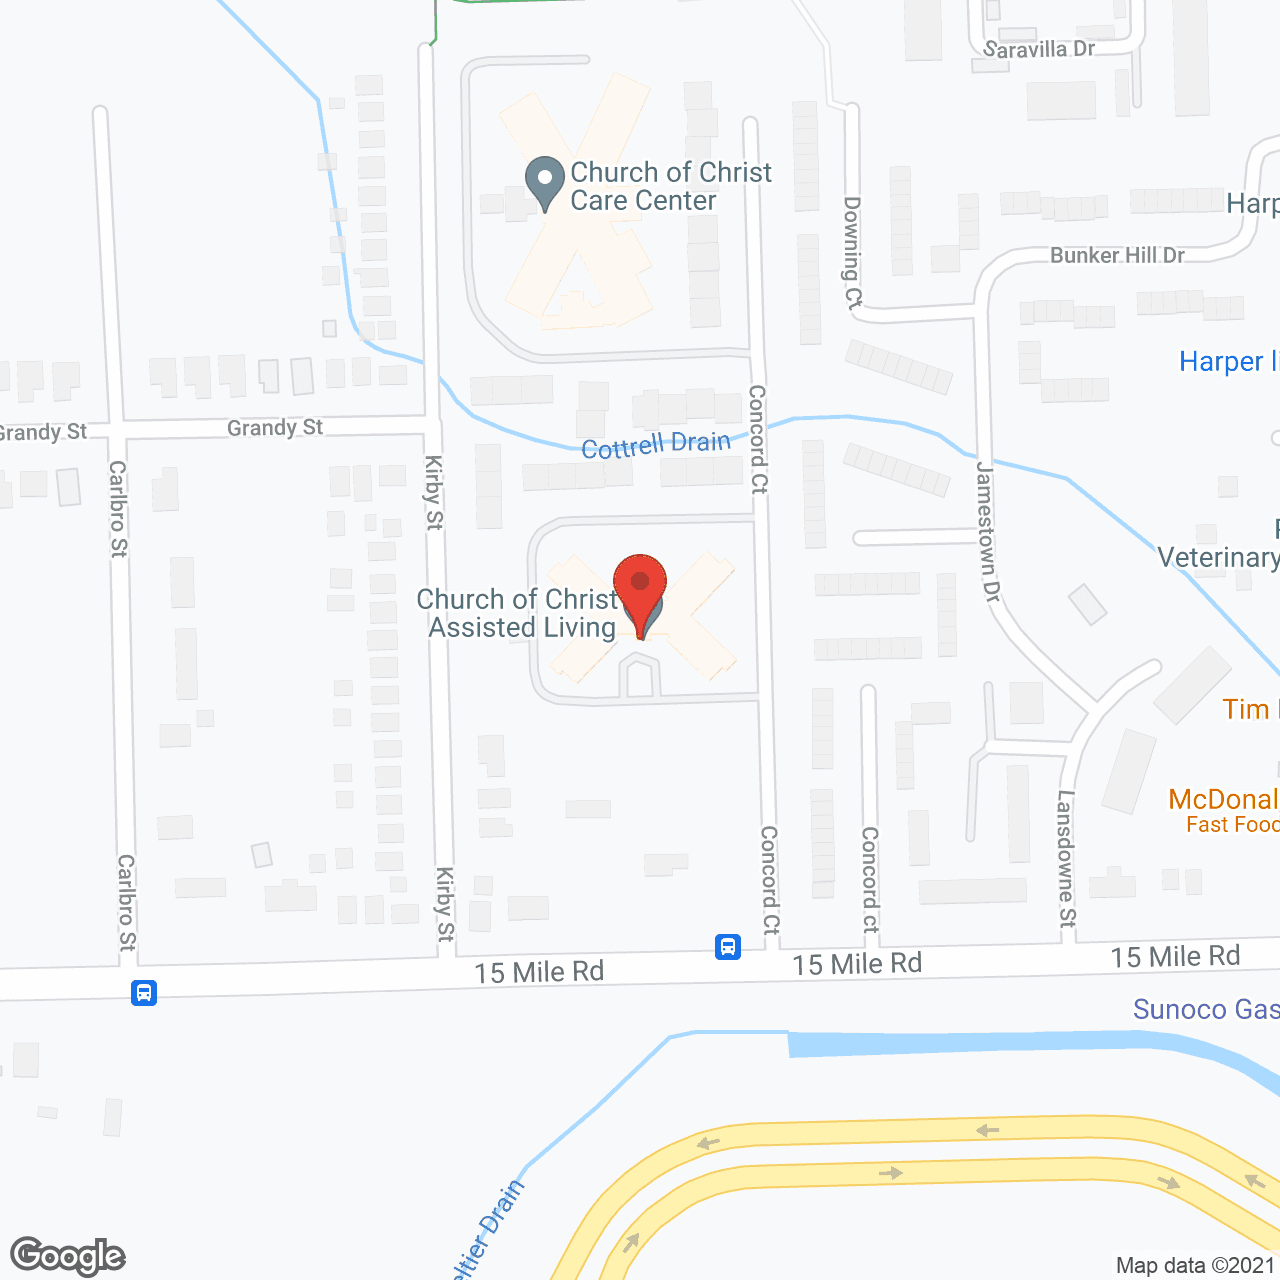 Church of Christ Assisted Living in google map